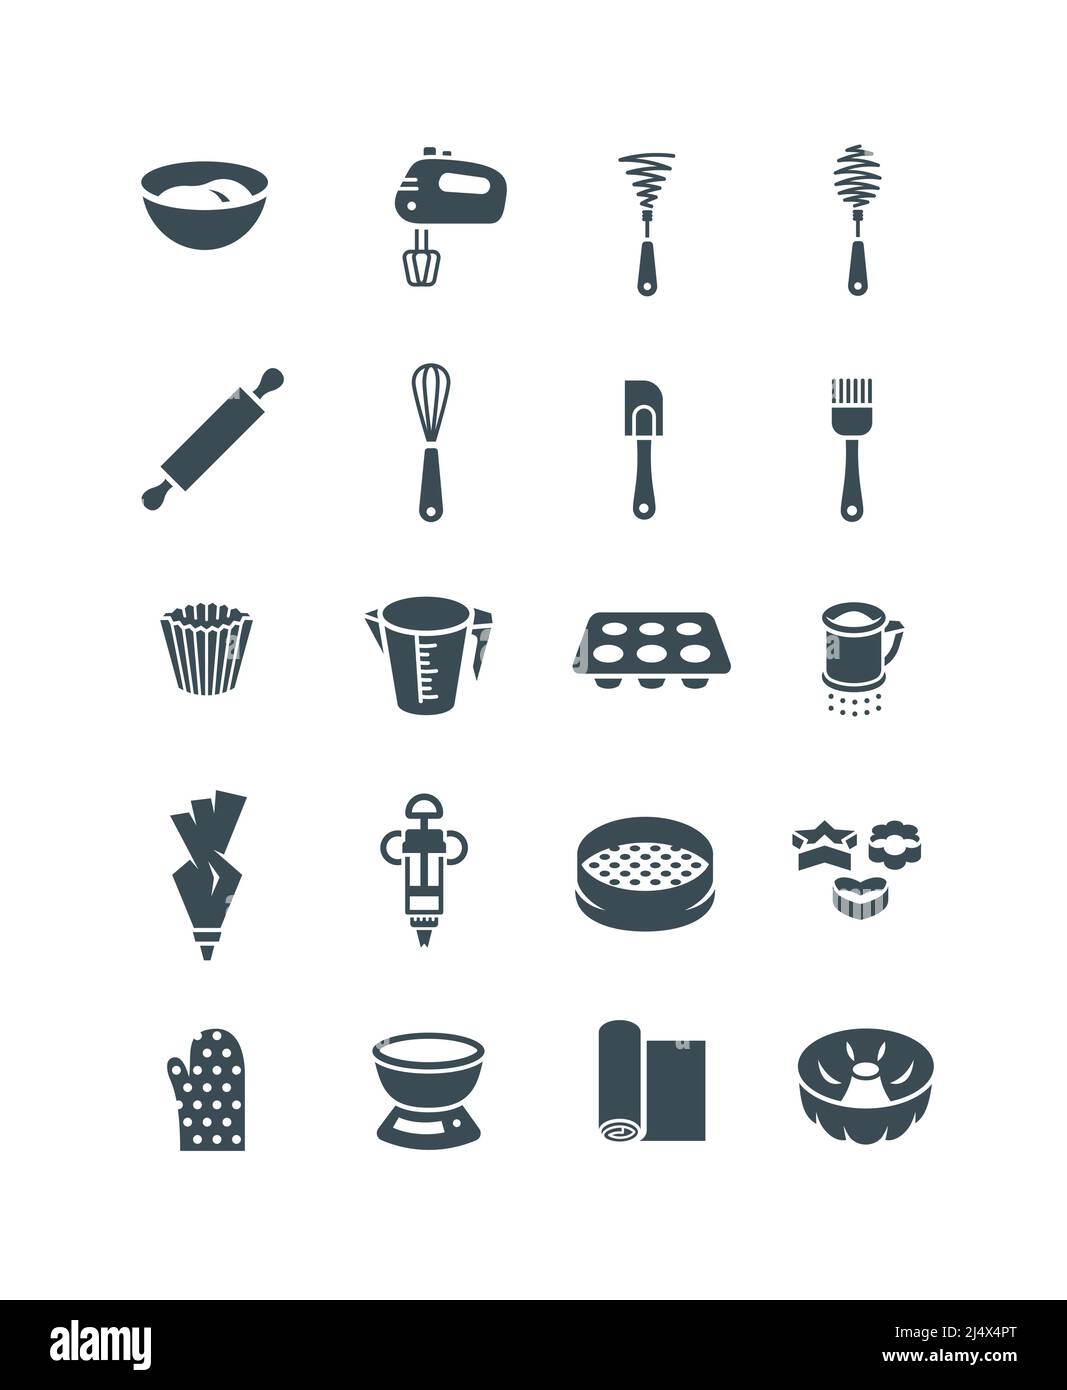 Baking tools icons. Flat vector simple pictograms. Kitchen bakery equipment for pastry cooking. Bakeware such as rolling pin, whisks, cake and bundt p Stock Vector